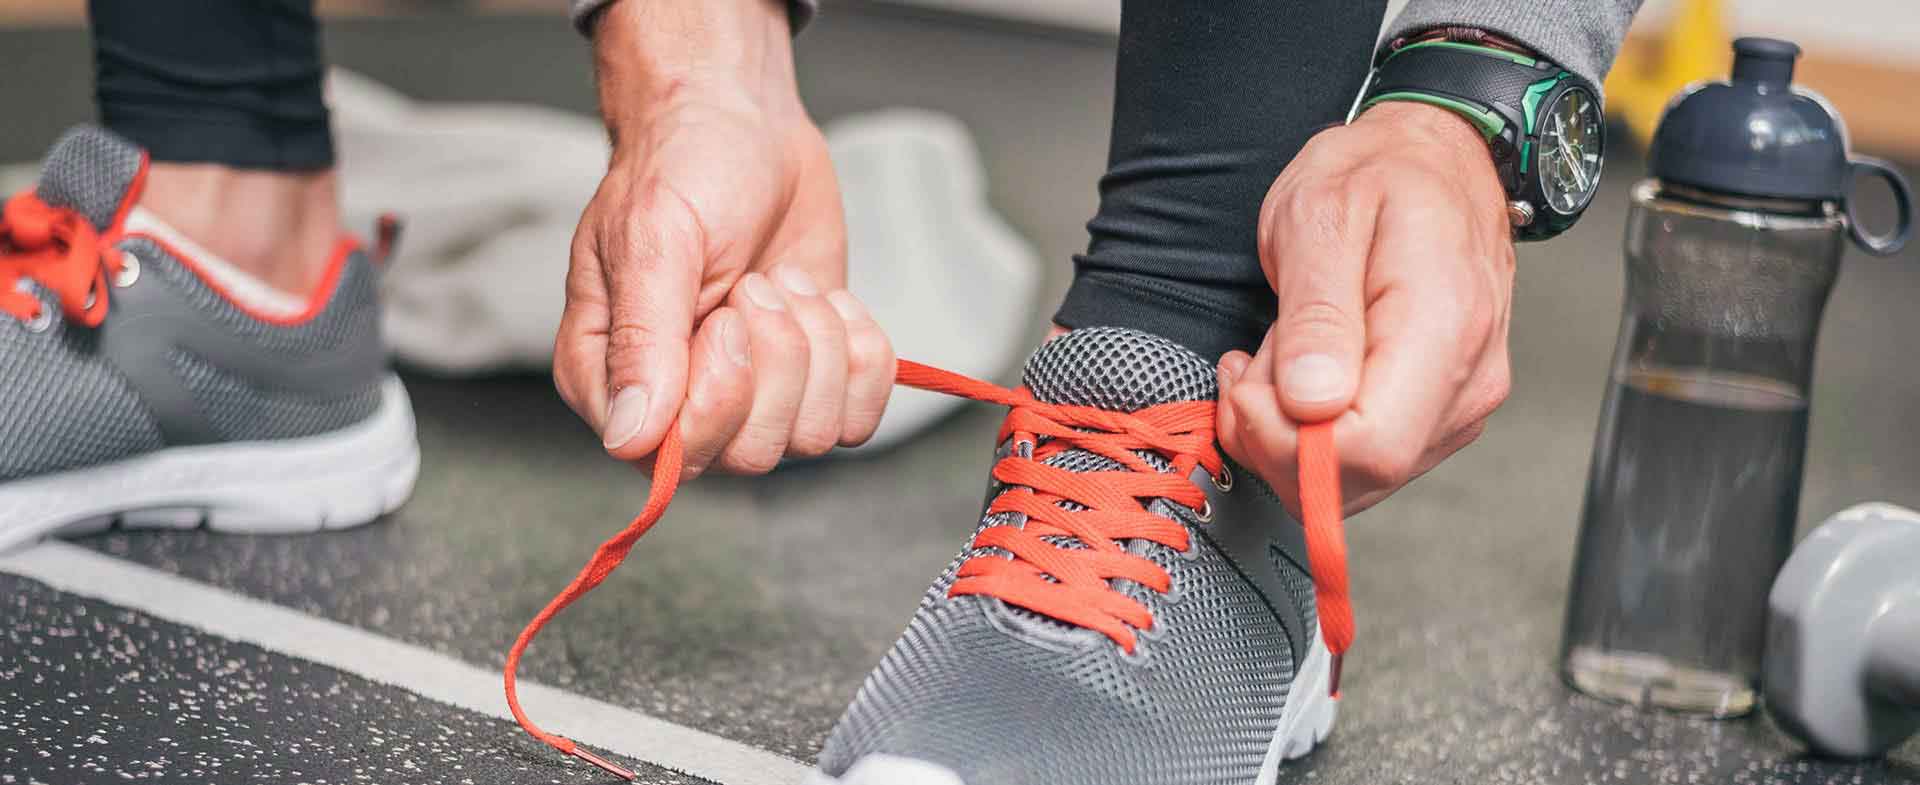 Choosing The Right Shoes For Your Workout | Henry Ford Health - Detroit, MI